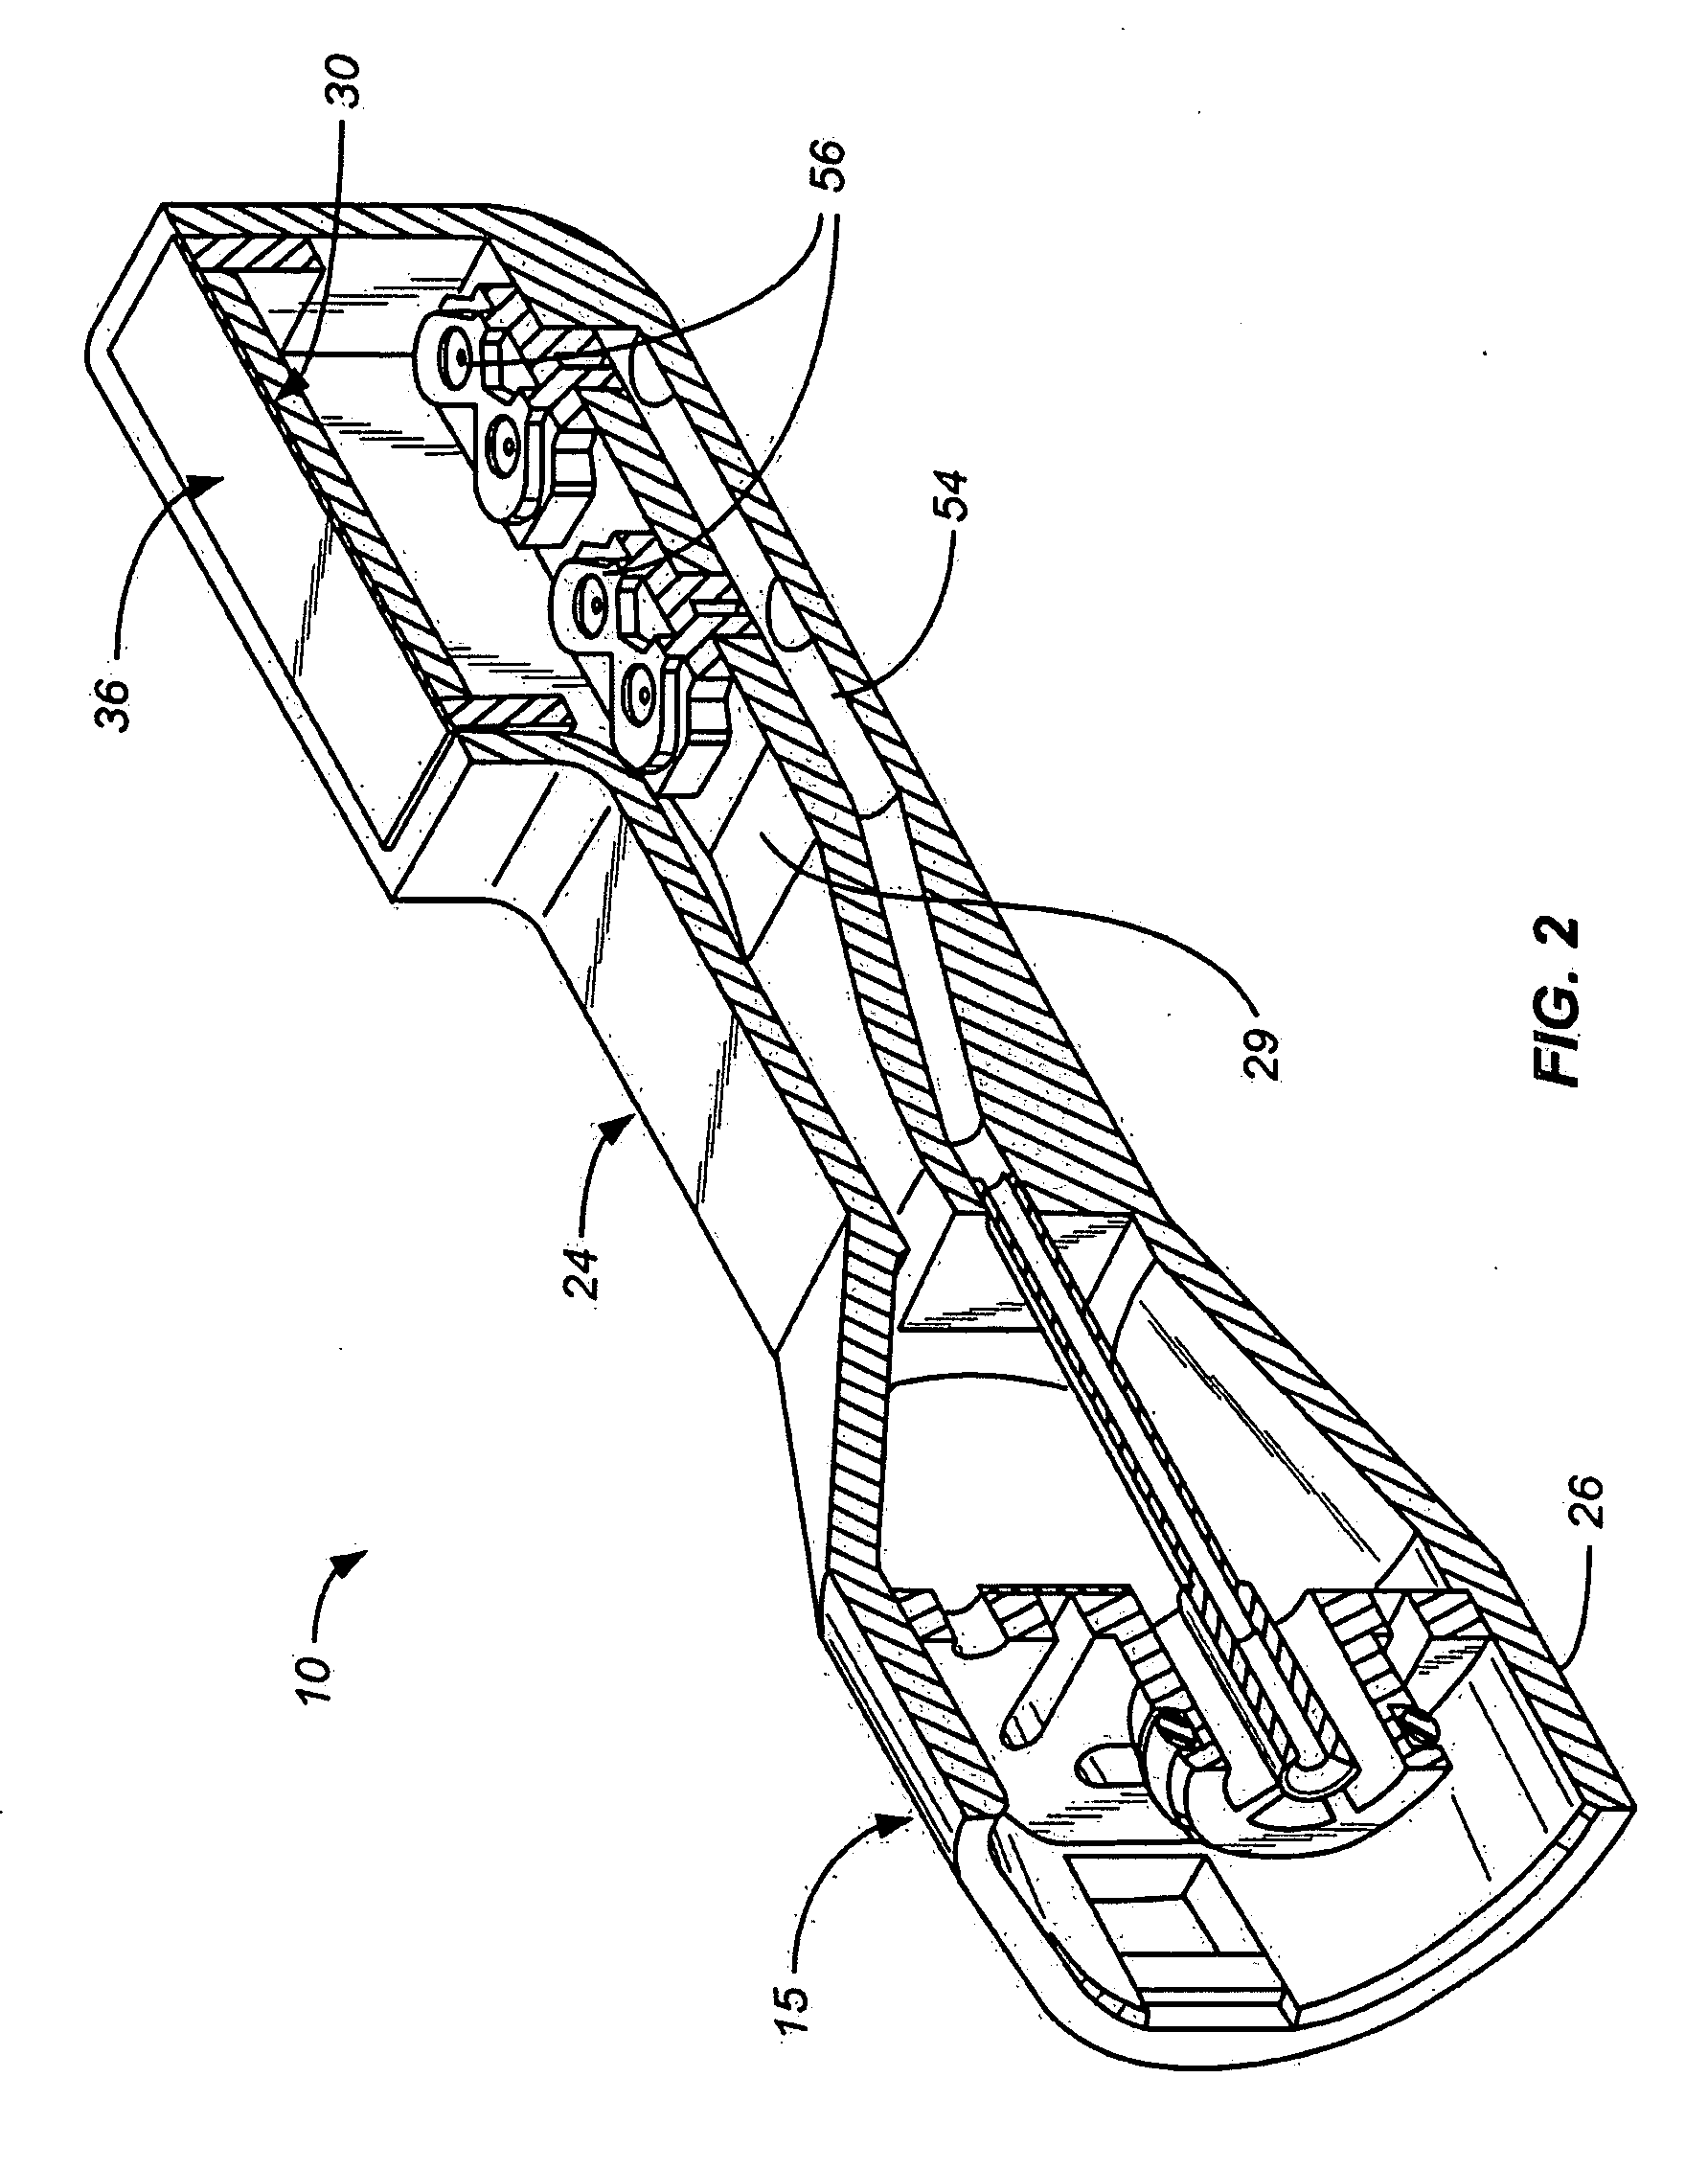 Vaginal remodeling device and methods